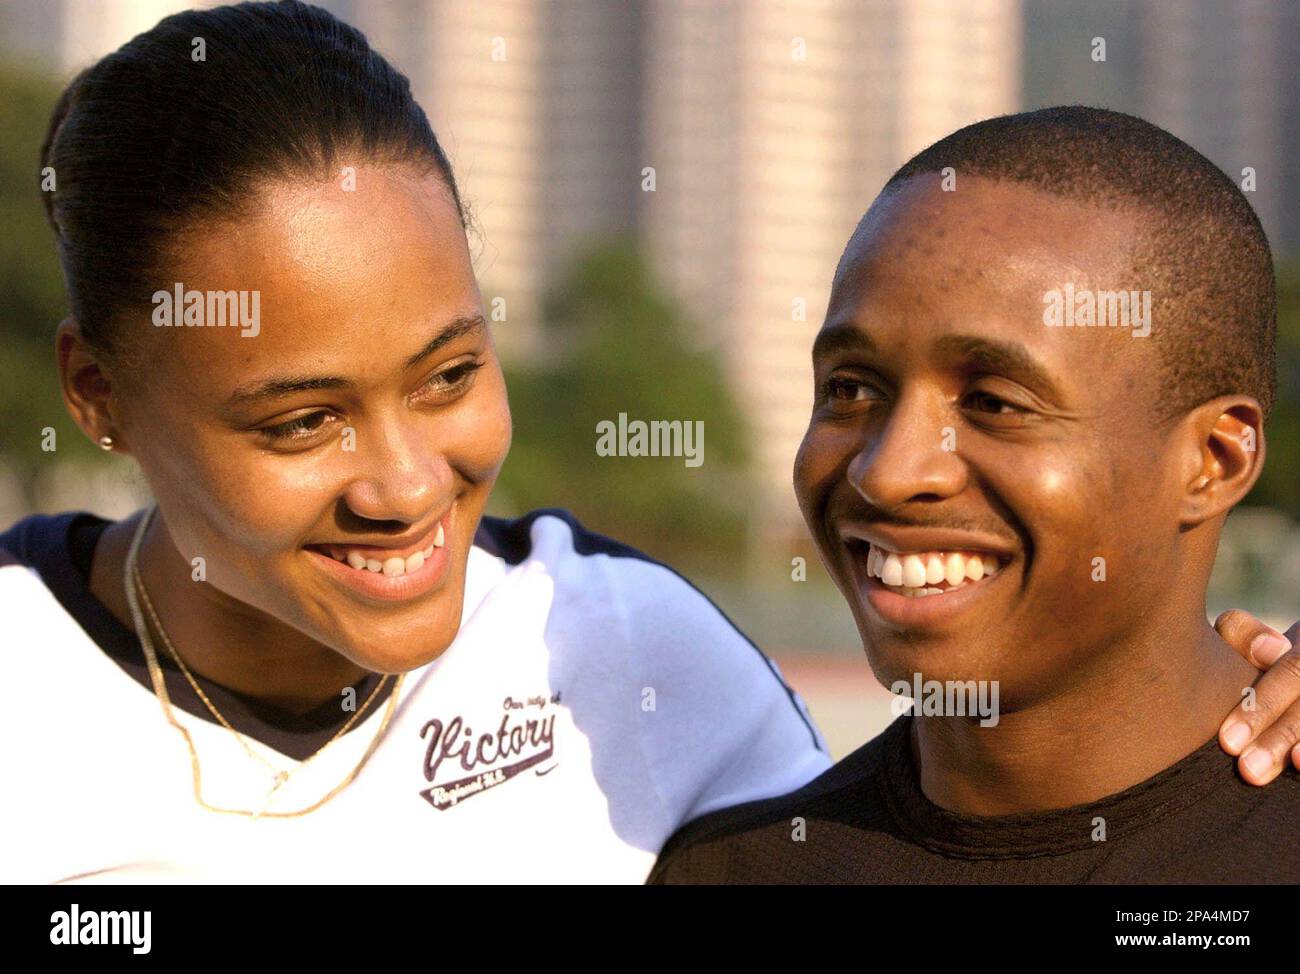 ** FILE ** In this Nov. 7, 2002 file photo, Marion Jones, left, and Tim Montgomery pose for photographers during a TAG Heuer's watch promotion in Hong Kong. Montgomery has been sentenced to 46 months in prison for his part in a fake-check scheme, Friday May 16, 2008 in White Plains, N.Y. Montgomery has a child with Marion Jones, the track superstar serving prison time for lying about the check scam and about her use of performance-enhancing drugs. ( AP Photo/Vincent Yu, File) Stock Photo